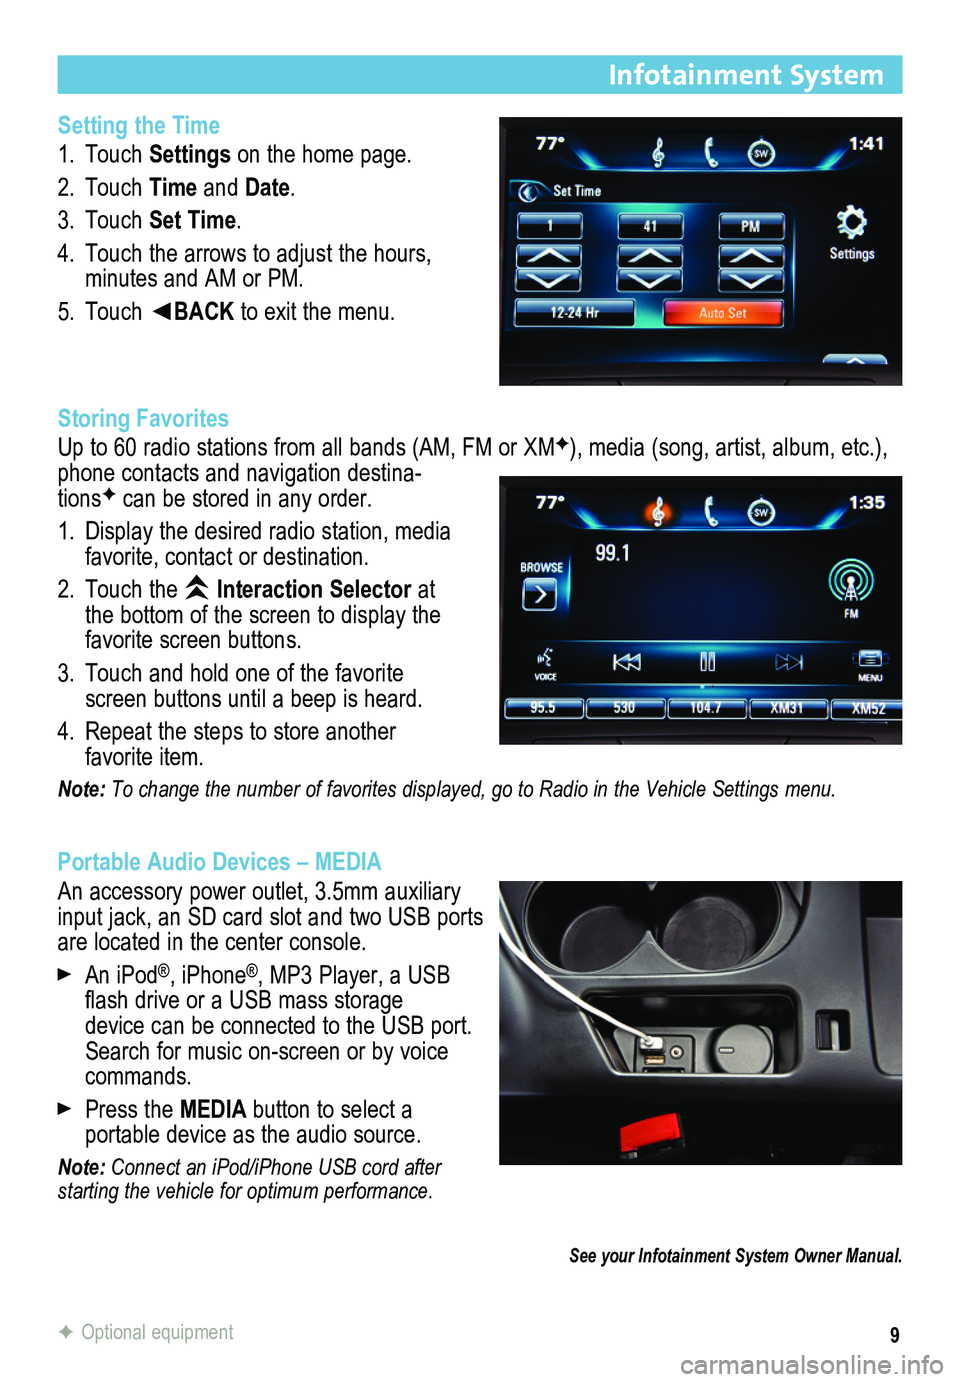 BUICK REGAL 2014  Get To Know Guide 9
Infotainment System
Setting the Time
1. Touch Settings on the home page.
2. Touch Time and Date.
3. Touch Set Time.
4. Touch the arrows to adjust the hours, minutes and AM or PM.
5. Touch ◄BACK to